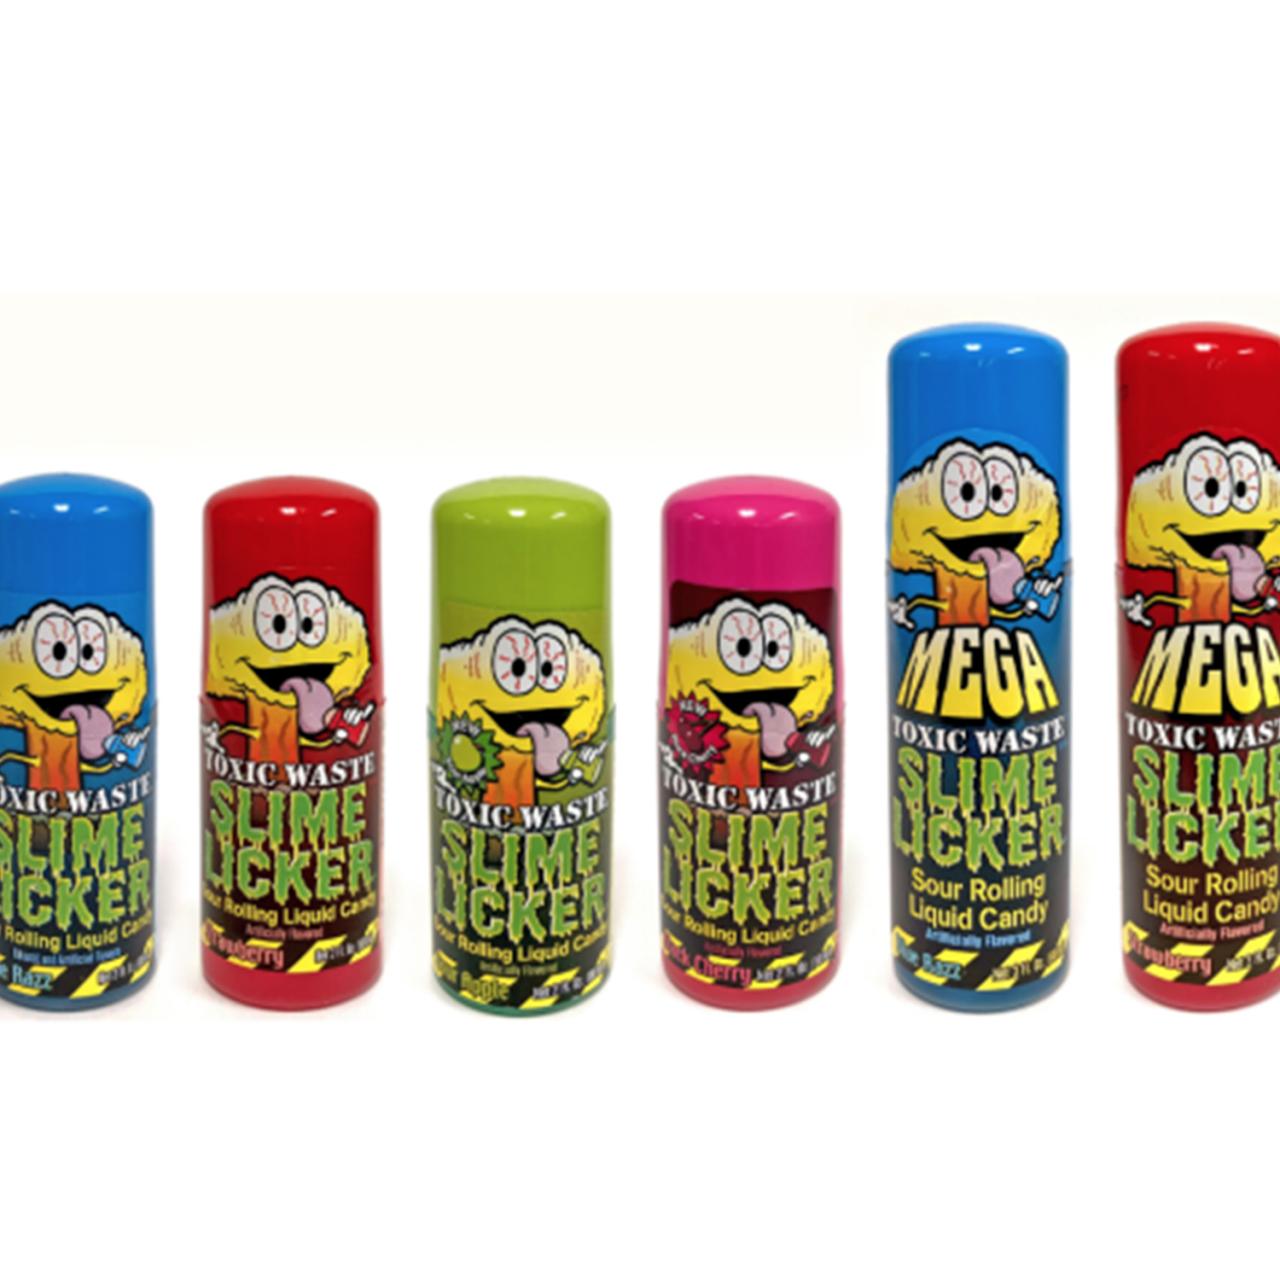 Toxic Waste Slime Licker Sour Mega Rolling Liquid Candy, Variety 2